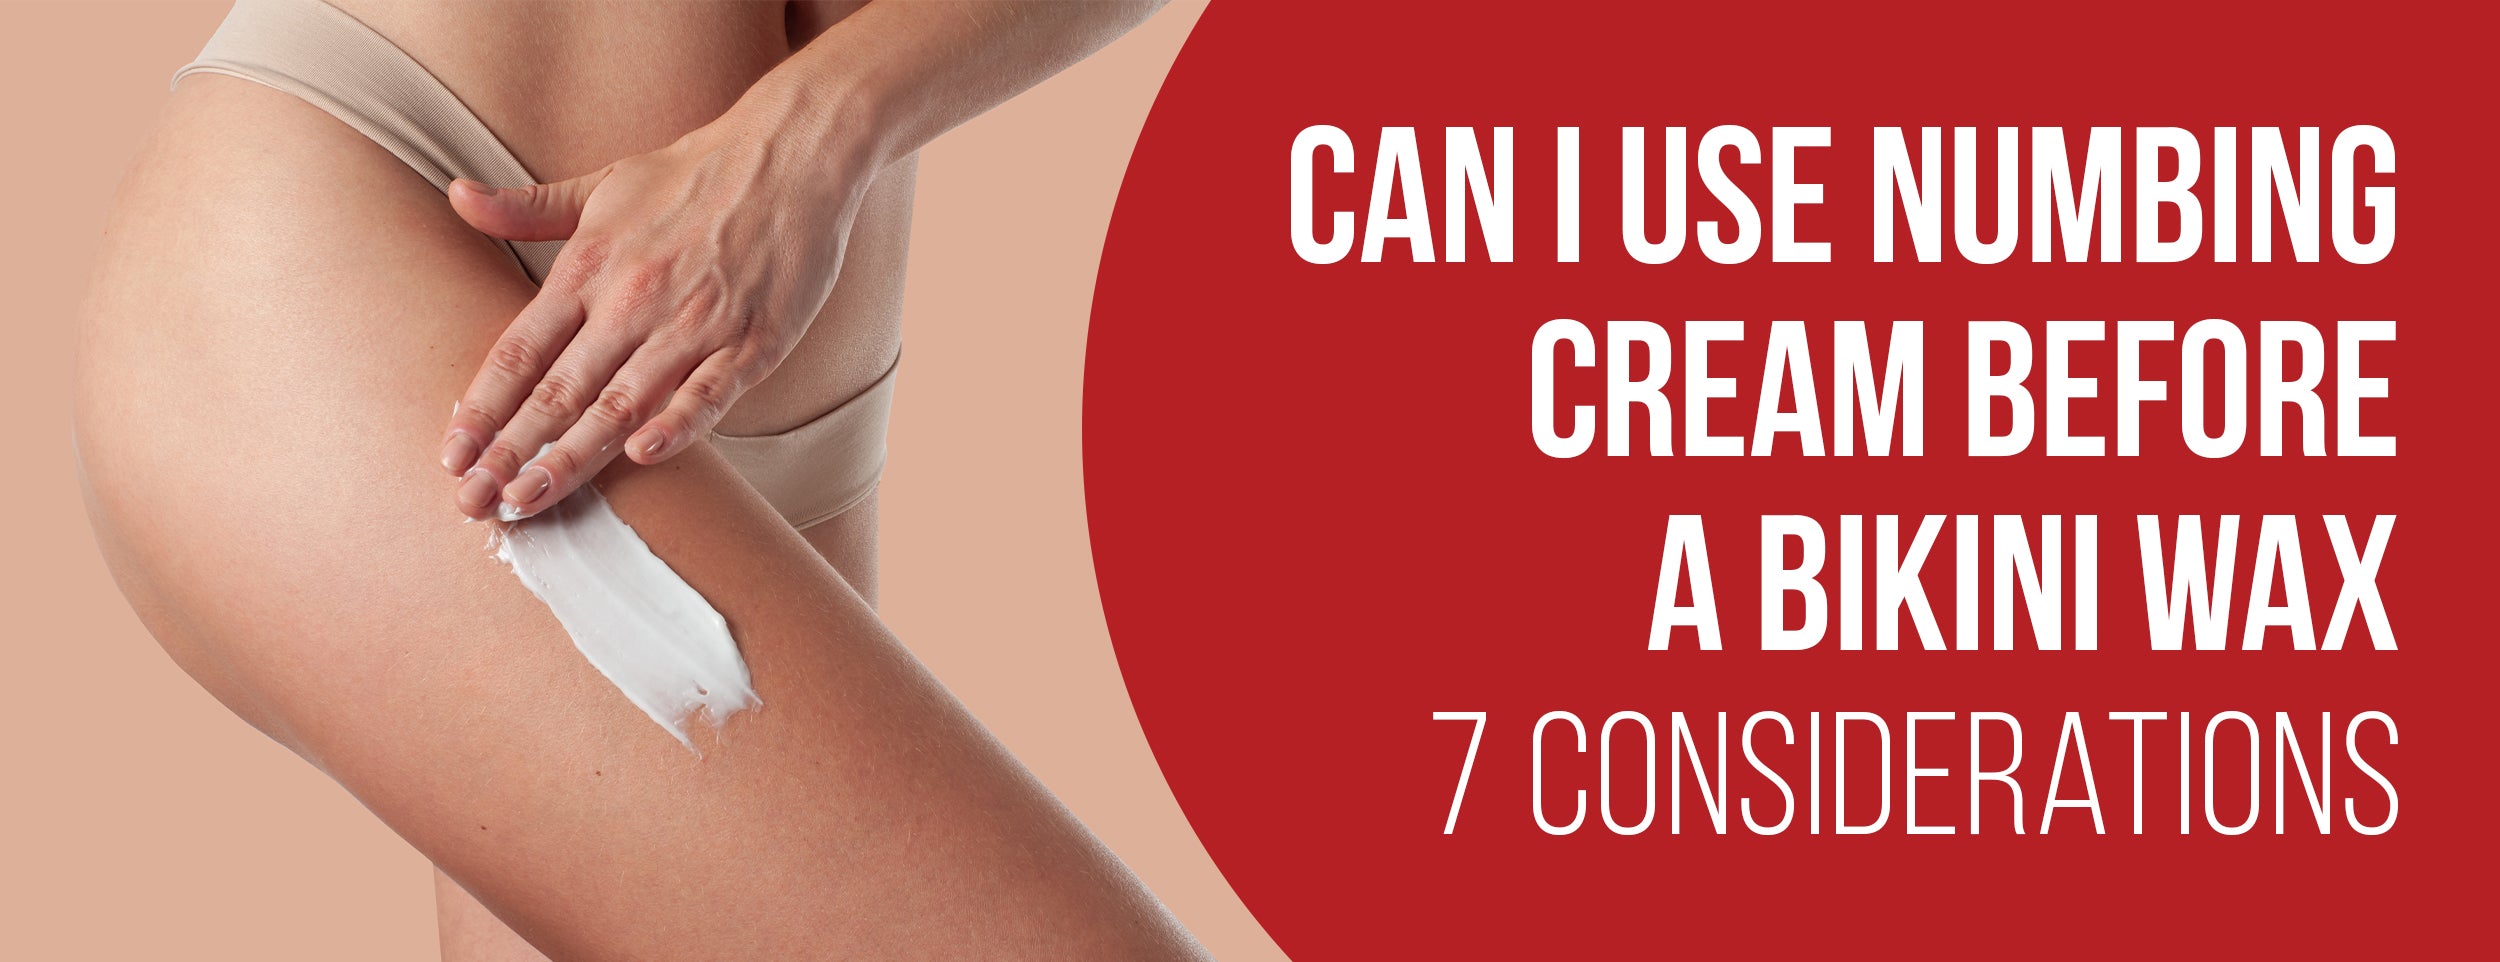 The 7 Considerations and 6 Advantages of Numbing Cream Before Bikini Wax